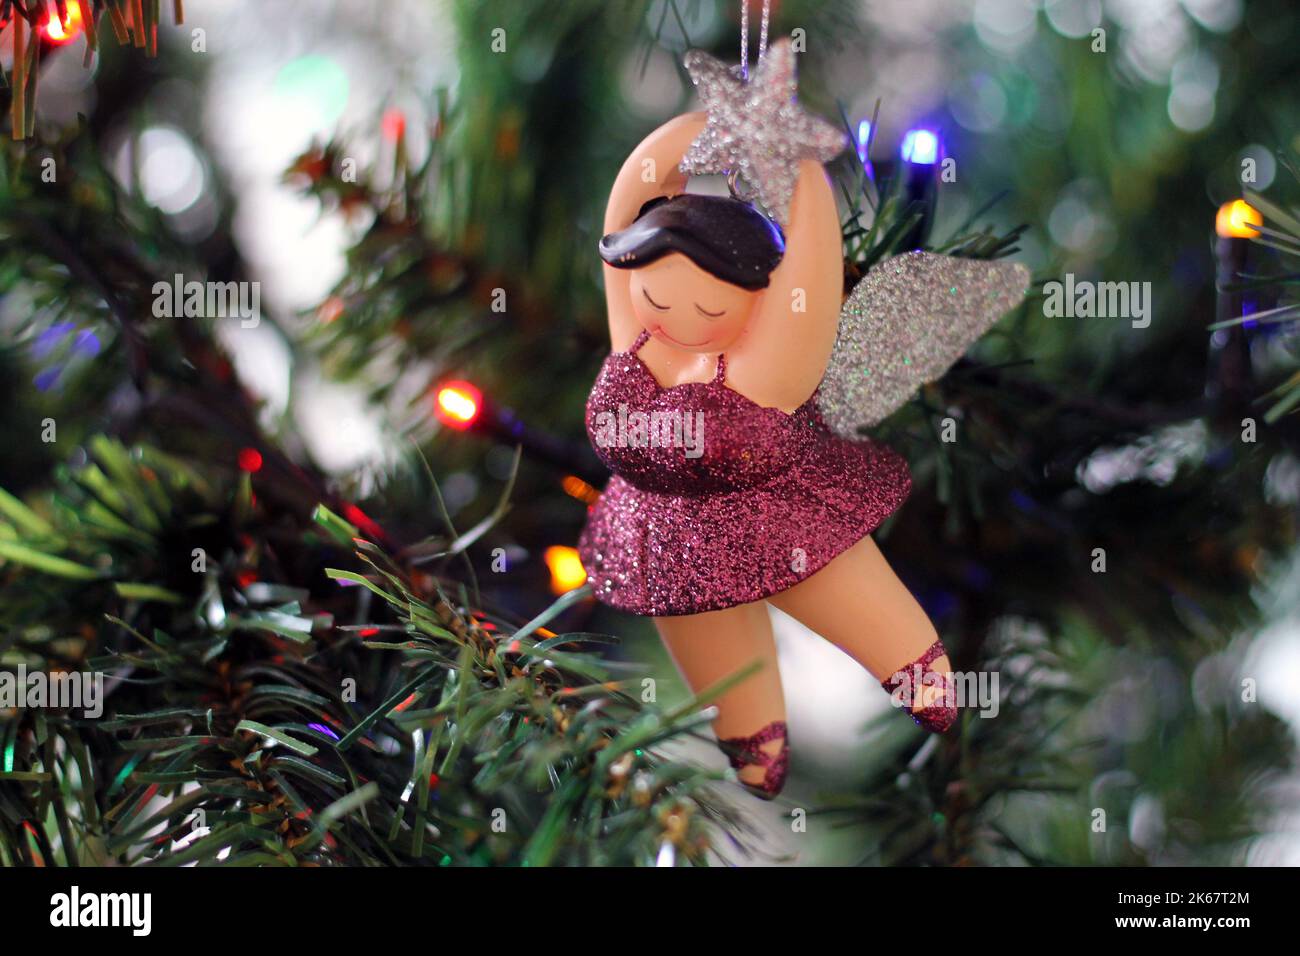 New christmas decorations in the form of a fat ballerina. Christmas toy hanging on the Christmas tree close-up. Stock Photo